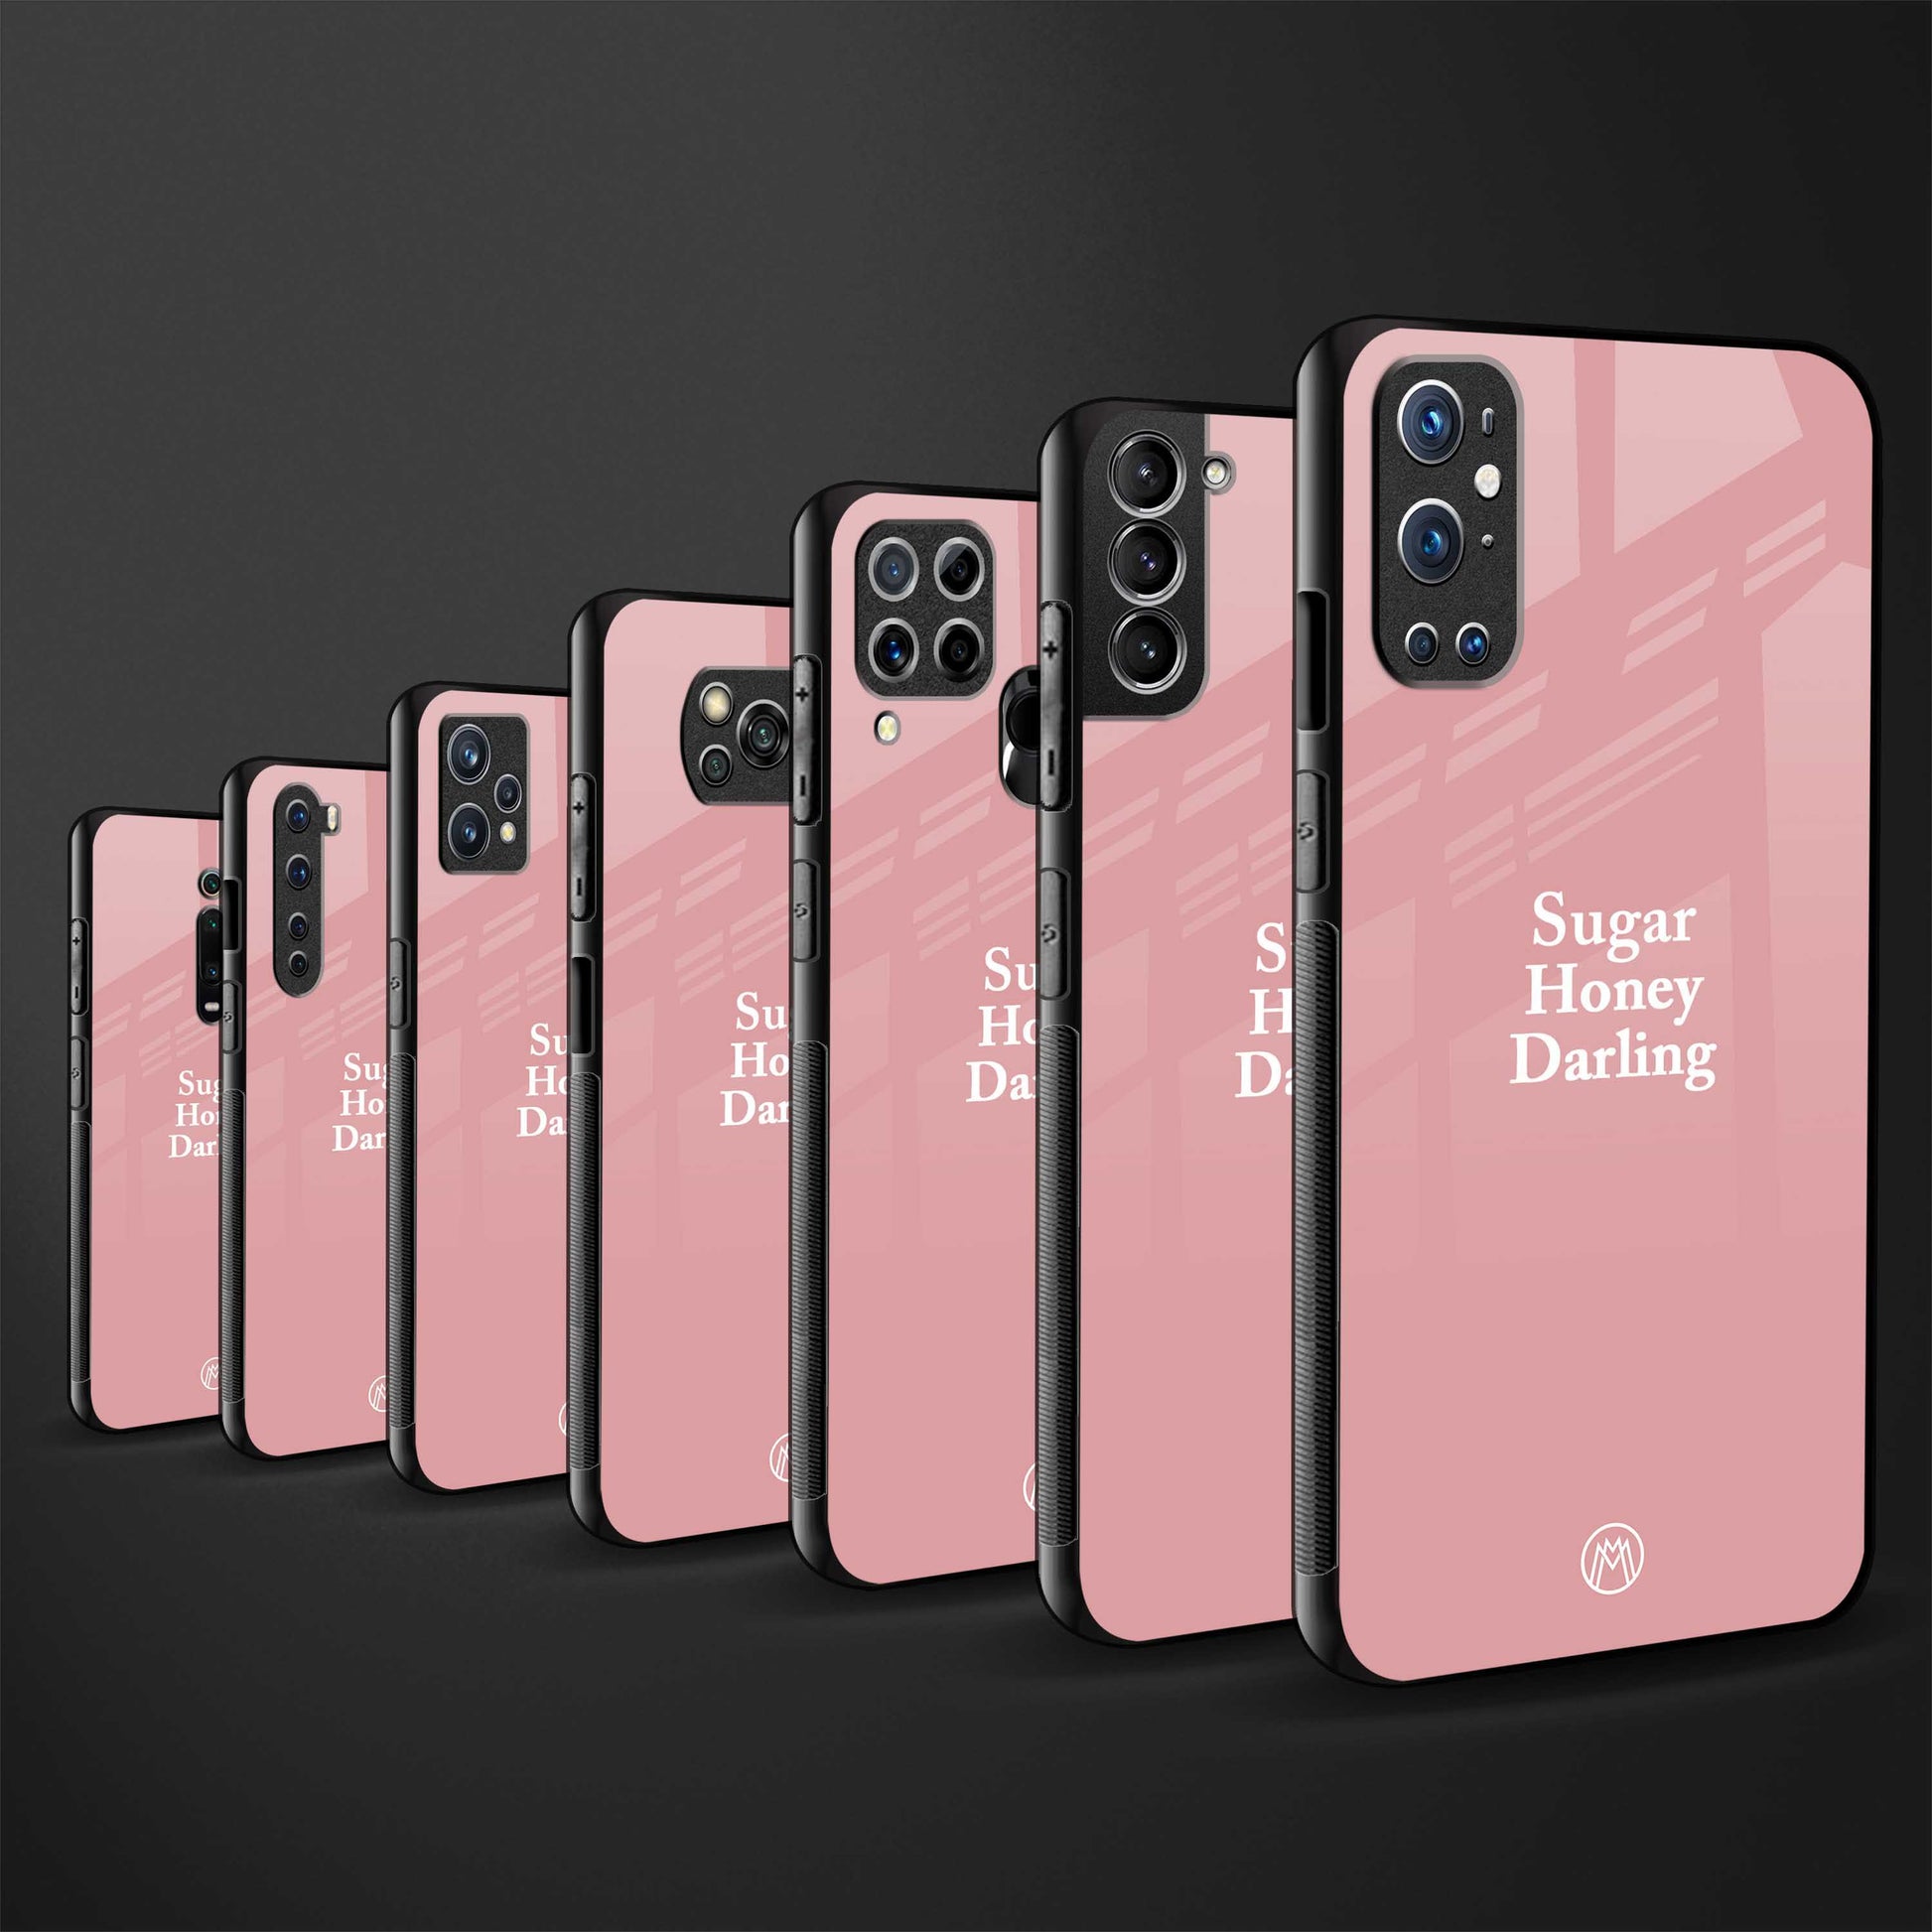 suger honey darling glass case for redmi note 9 pro image-3